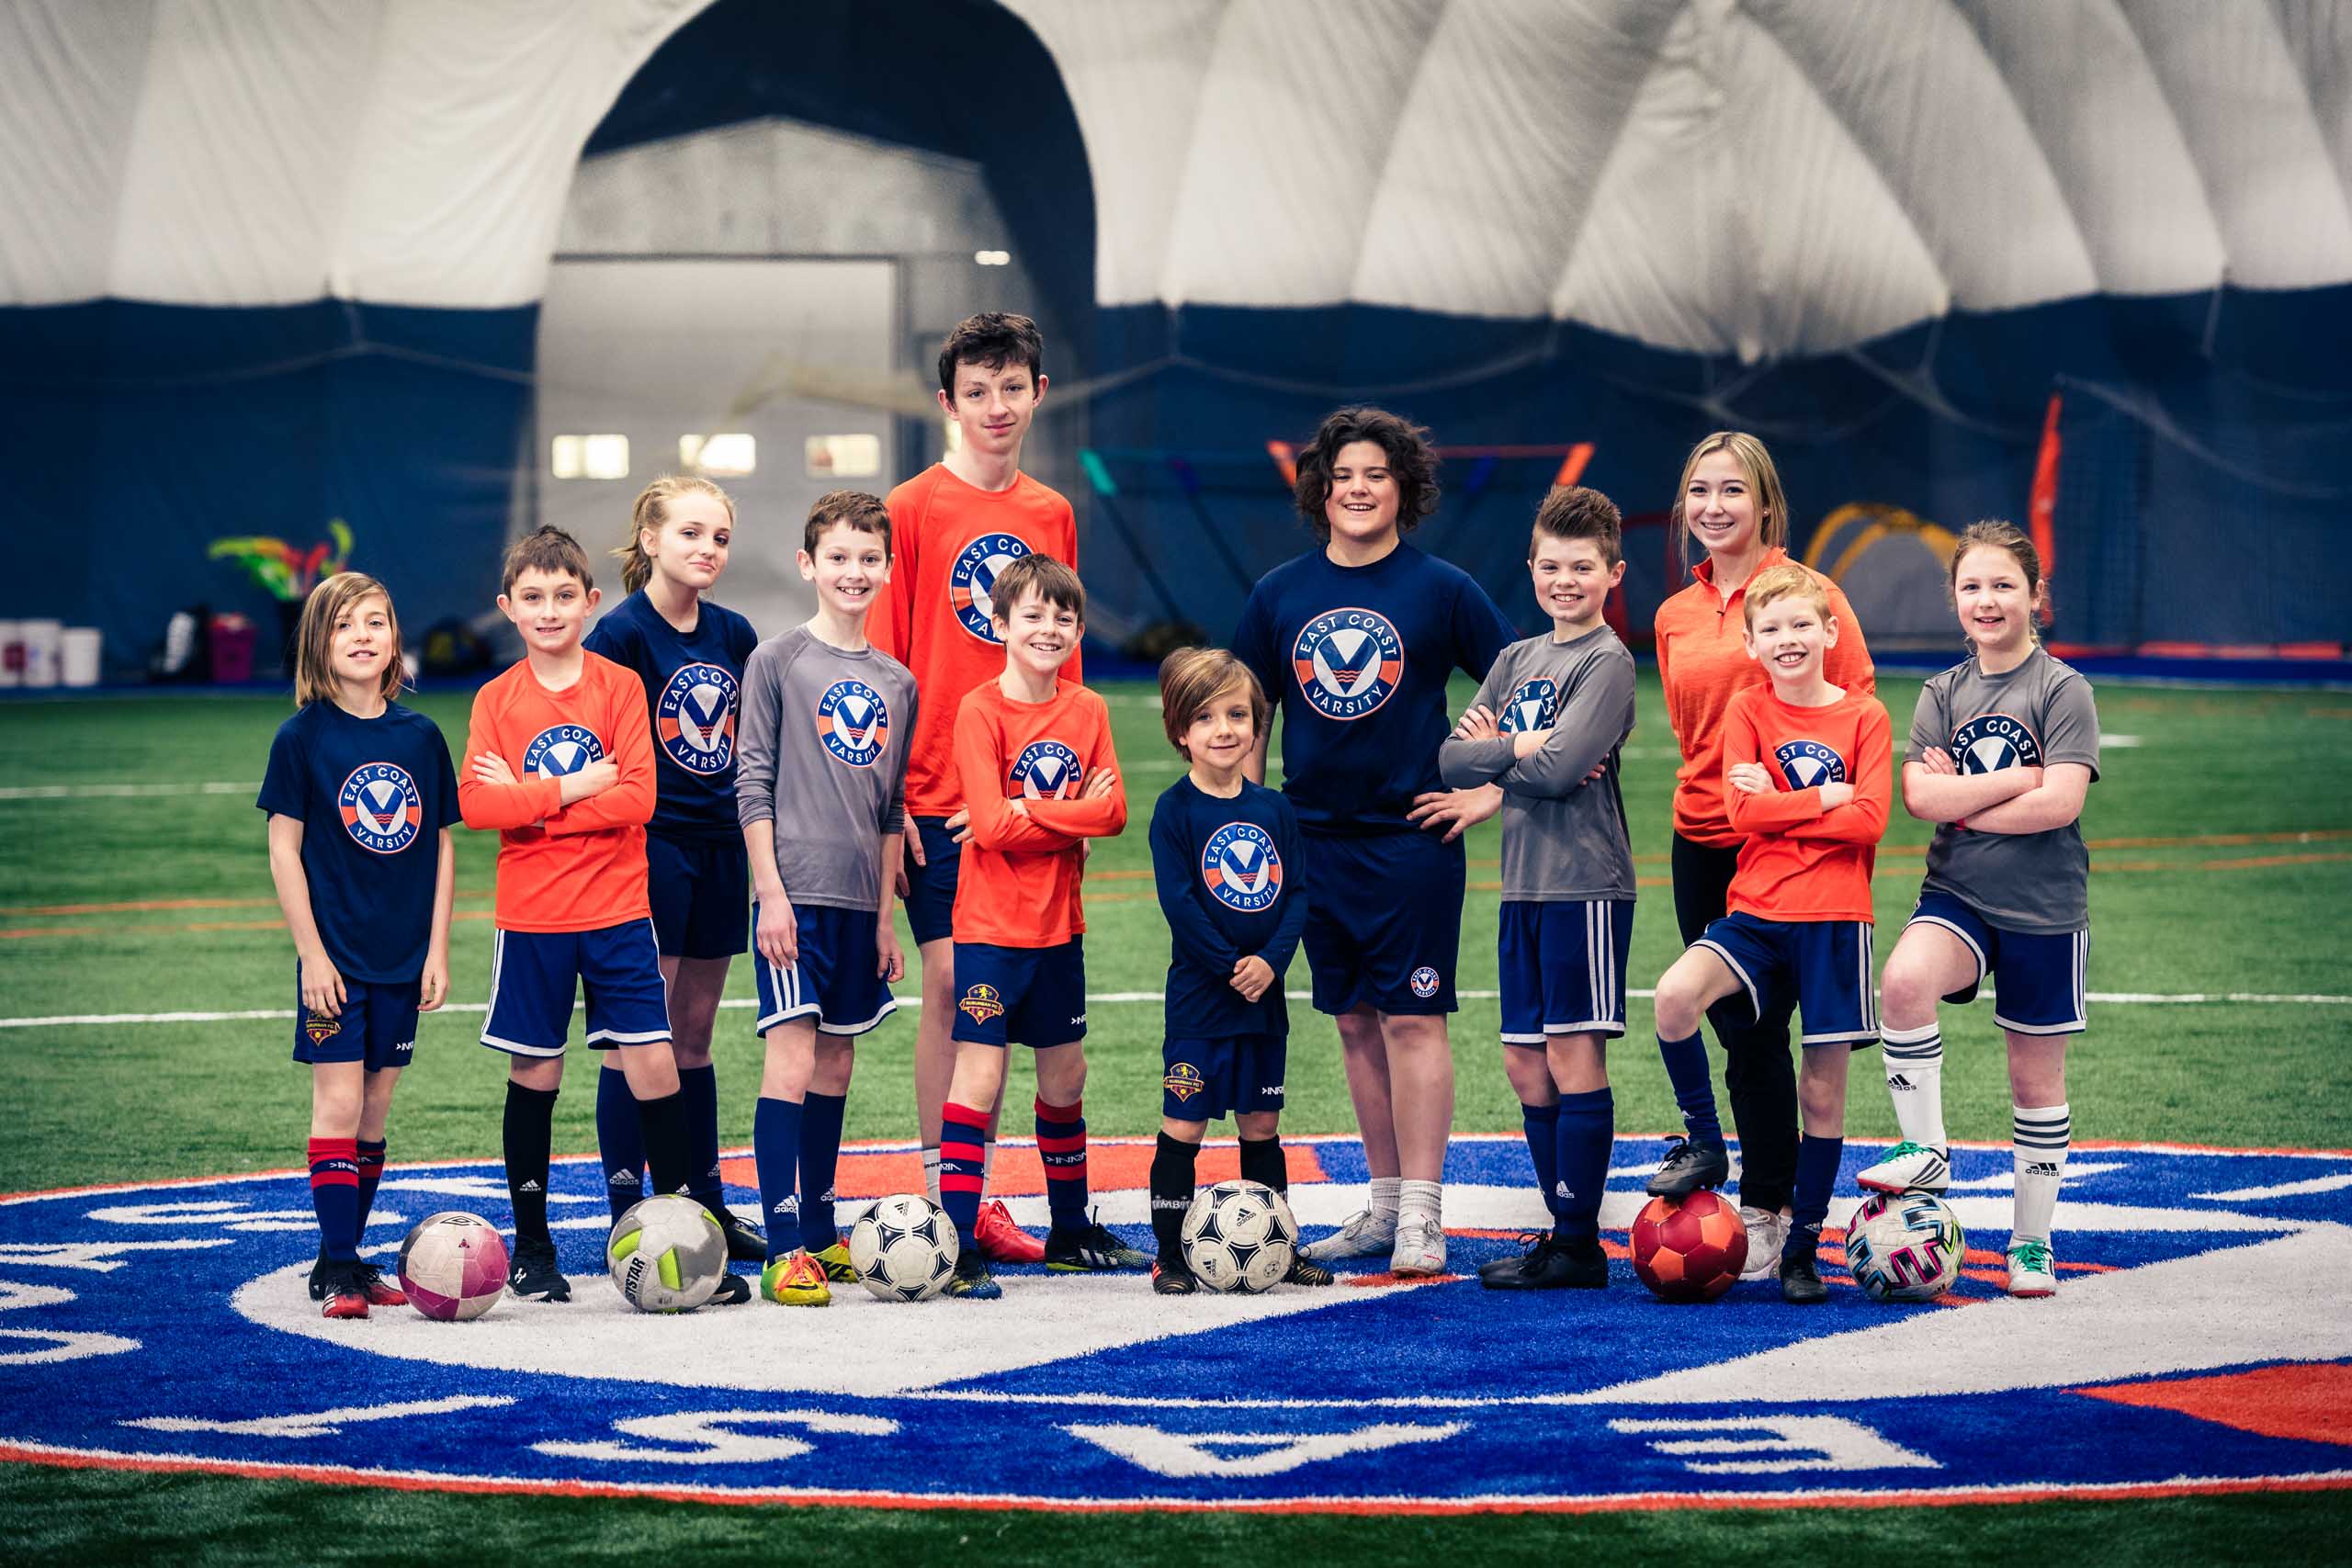 A group of students of different ages with soccer balls on the turf.